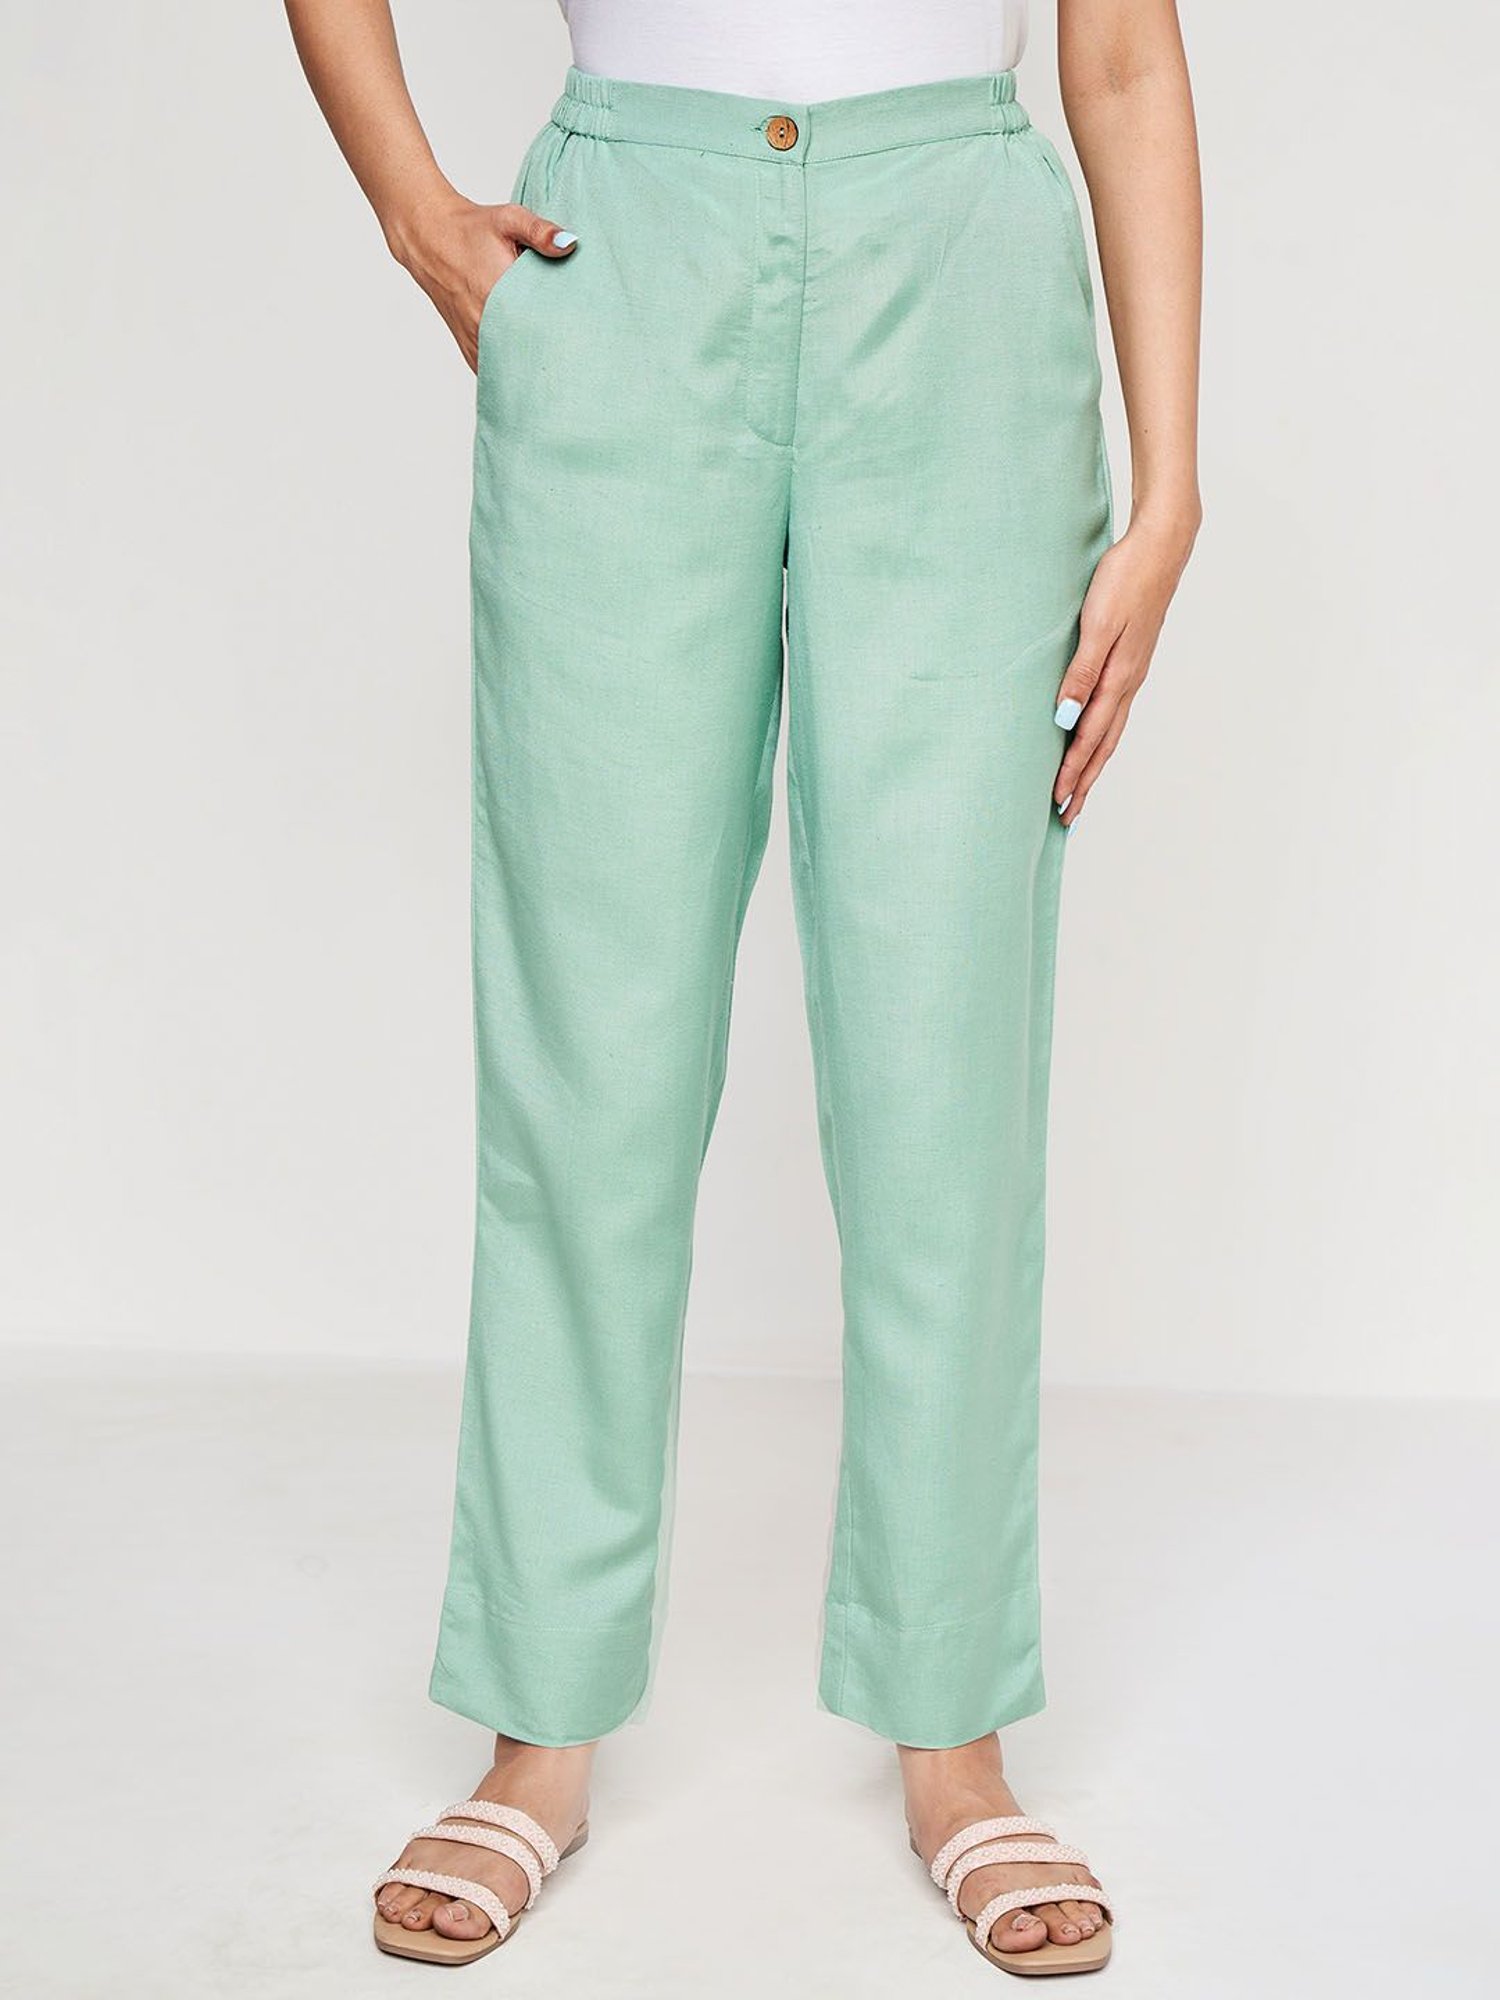 Women's High-rise Faux Leather Ankle Trousers - A New Day™ Light Green 17 :  Target